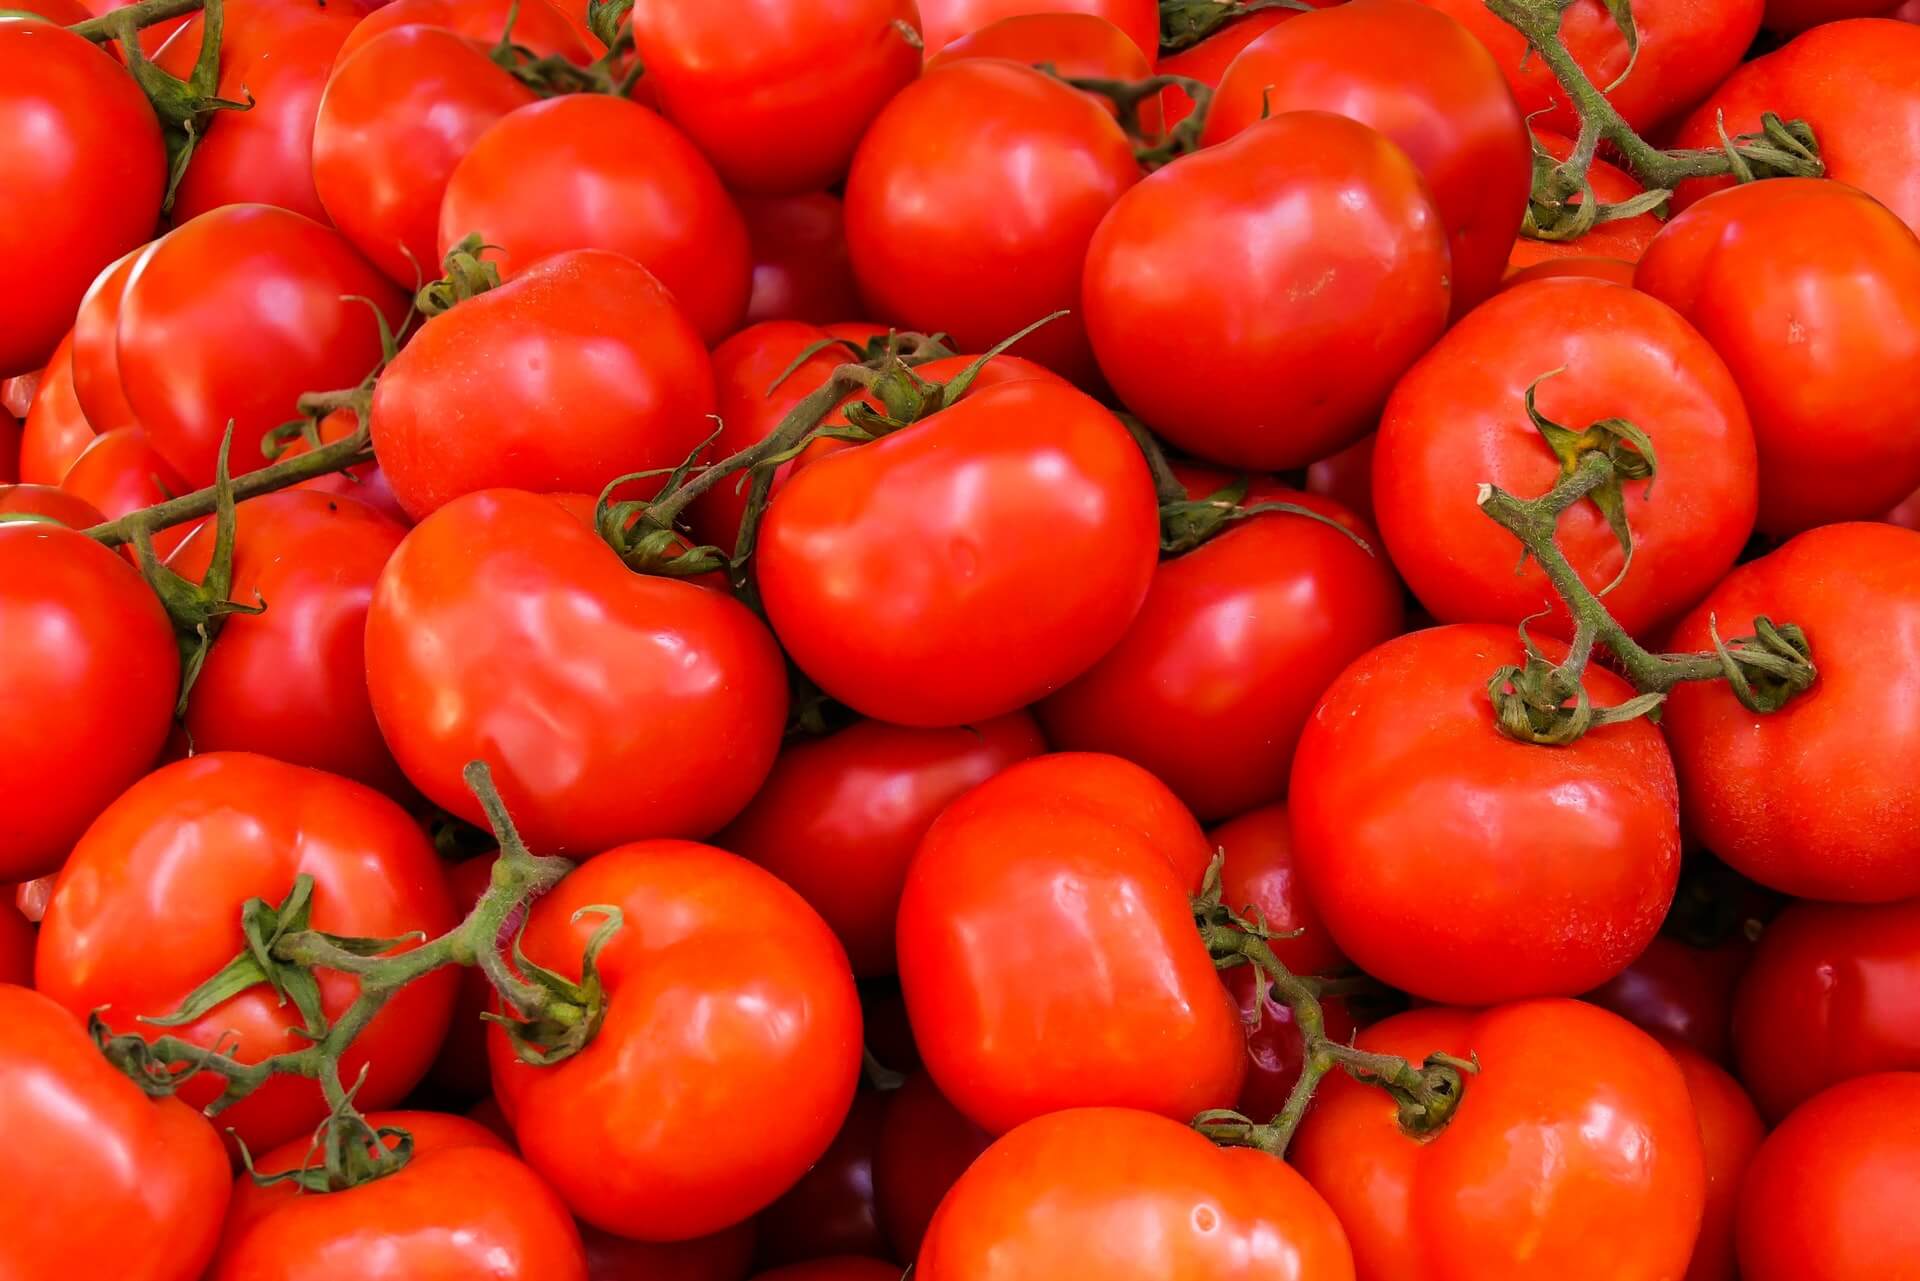 Gene-edited super tomato may provide the vitamin punch to fight Alzheimer's, Parkinson's, and cancer